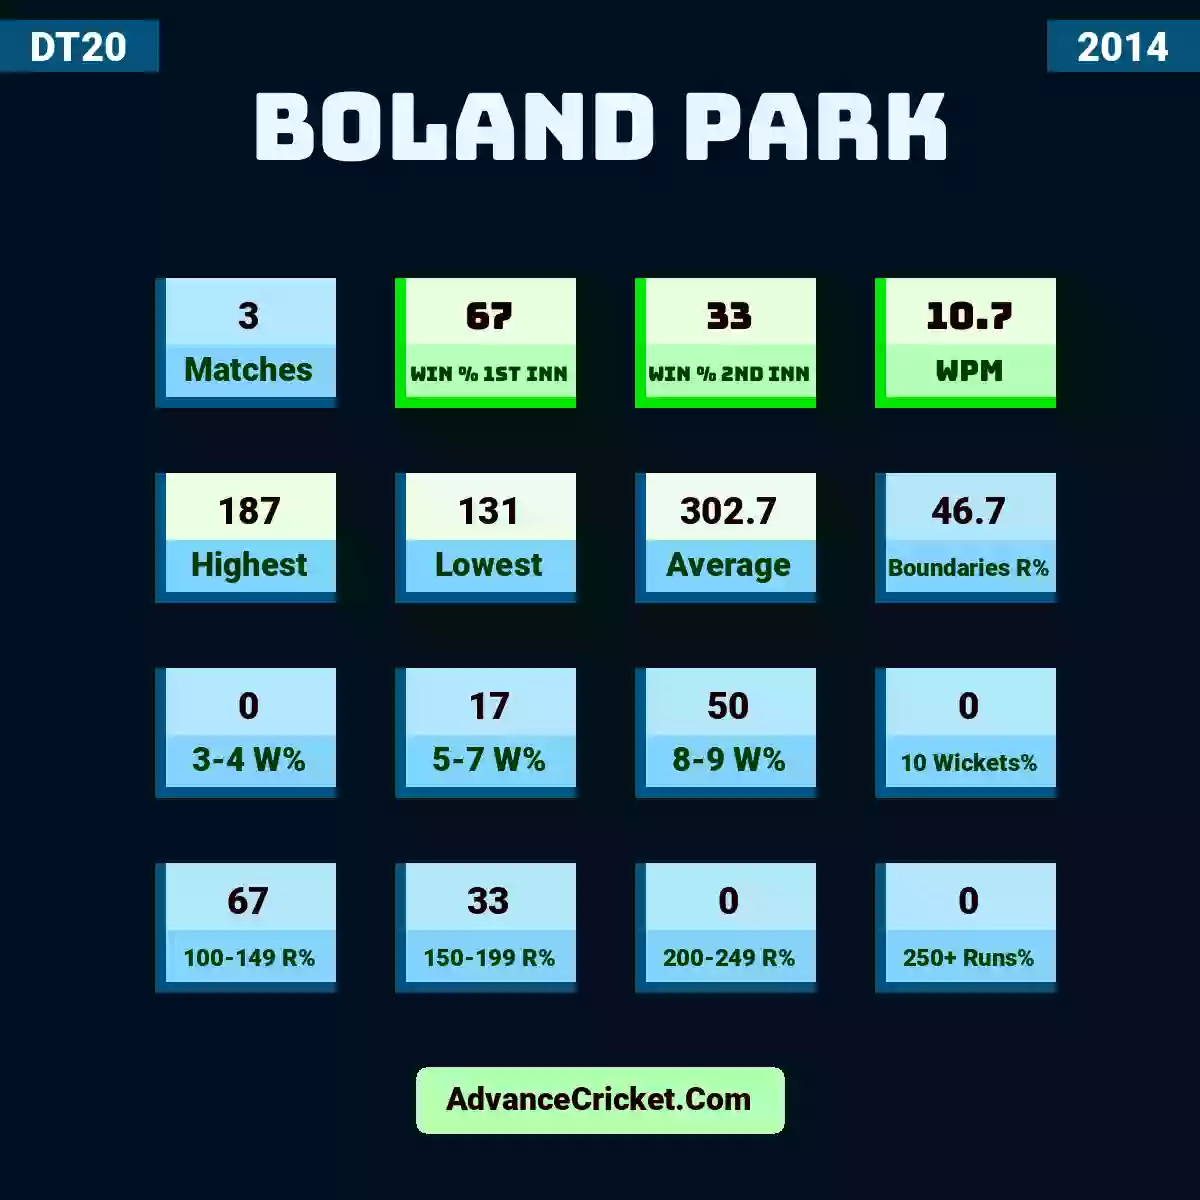 Image showing Boland Park with Matches: 3, Win % 1st Inn: 67, Win % 2nd Inn: 33, WPM: 10.7, Highest: 187, Lowest: 131, Average: 302.7, Boundaries R%: 46.7, 3-4 W%: 0, 5-7 W%: 17, 8-9 W%: 50, 10 Wickets%: 0, 100-149 R%: 67, 150-199 R%: 33, 200-249 R%: 0, 250+ Runs%: 0.